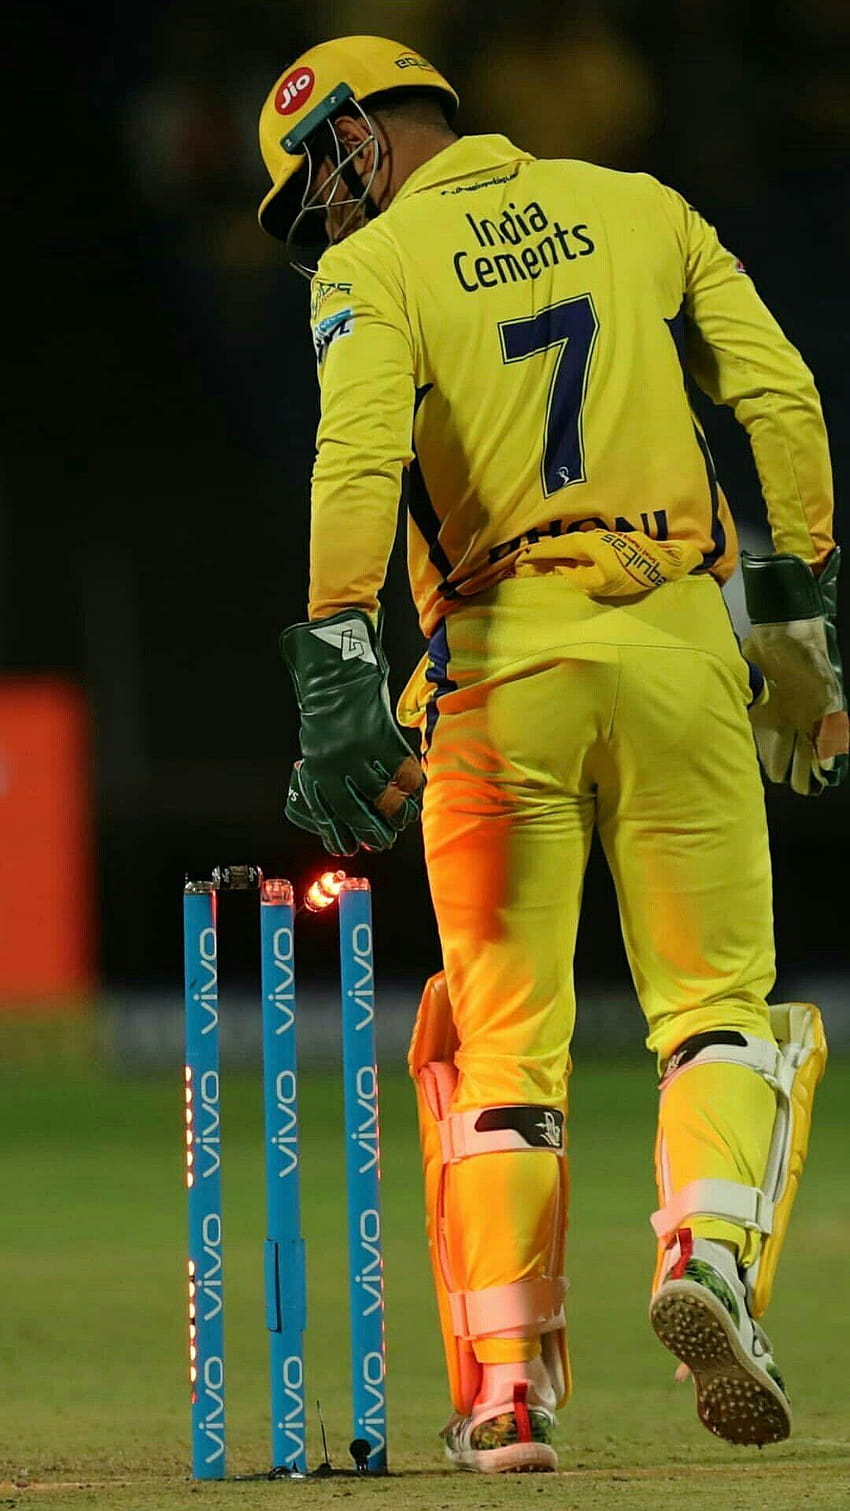 Csk » Hupages » Iphone, cricket mobile HD phone wallpaper